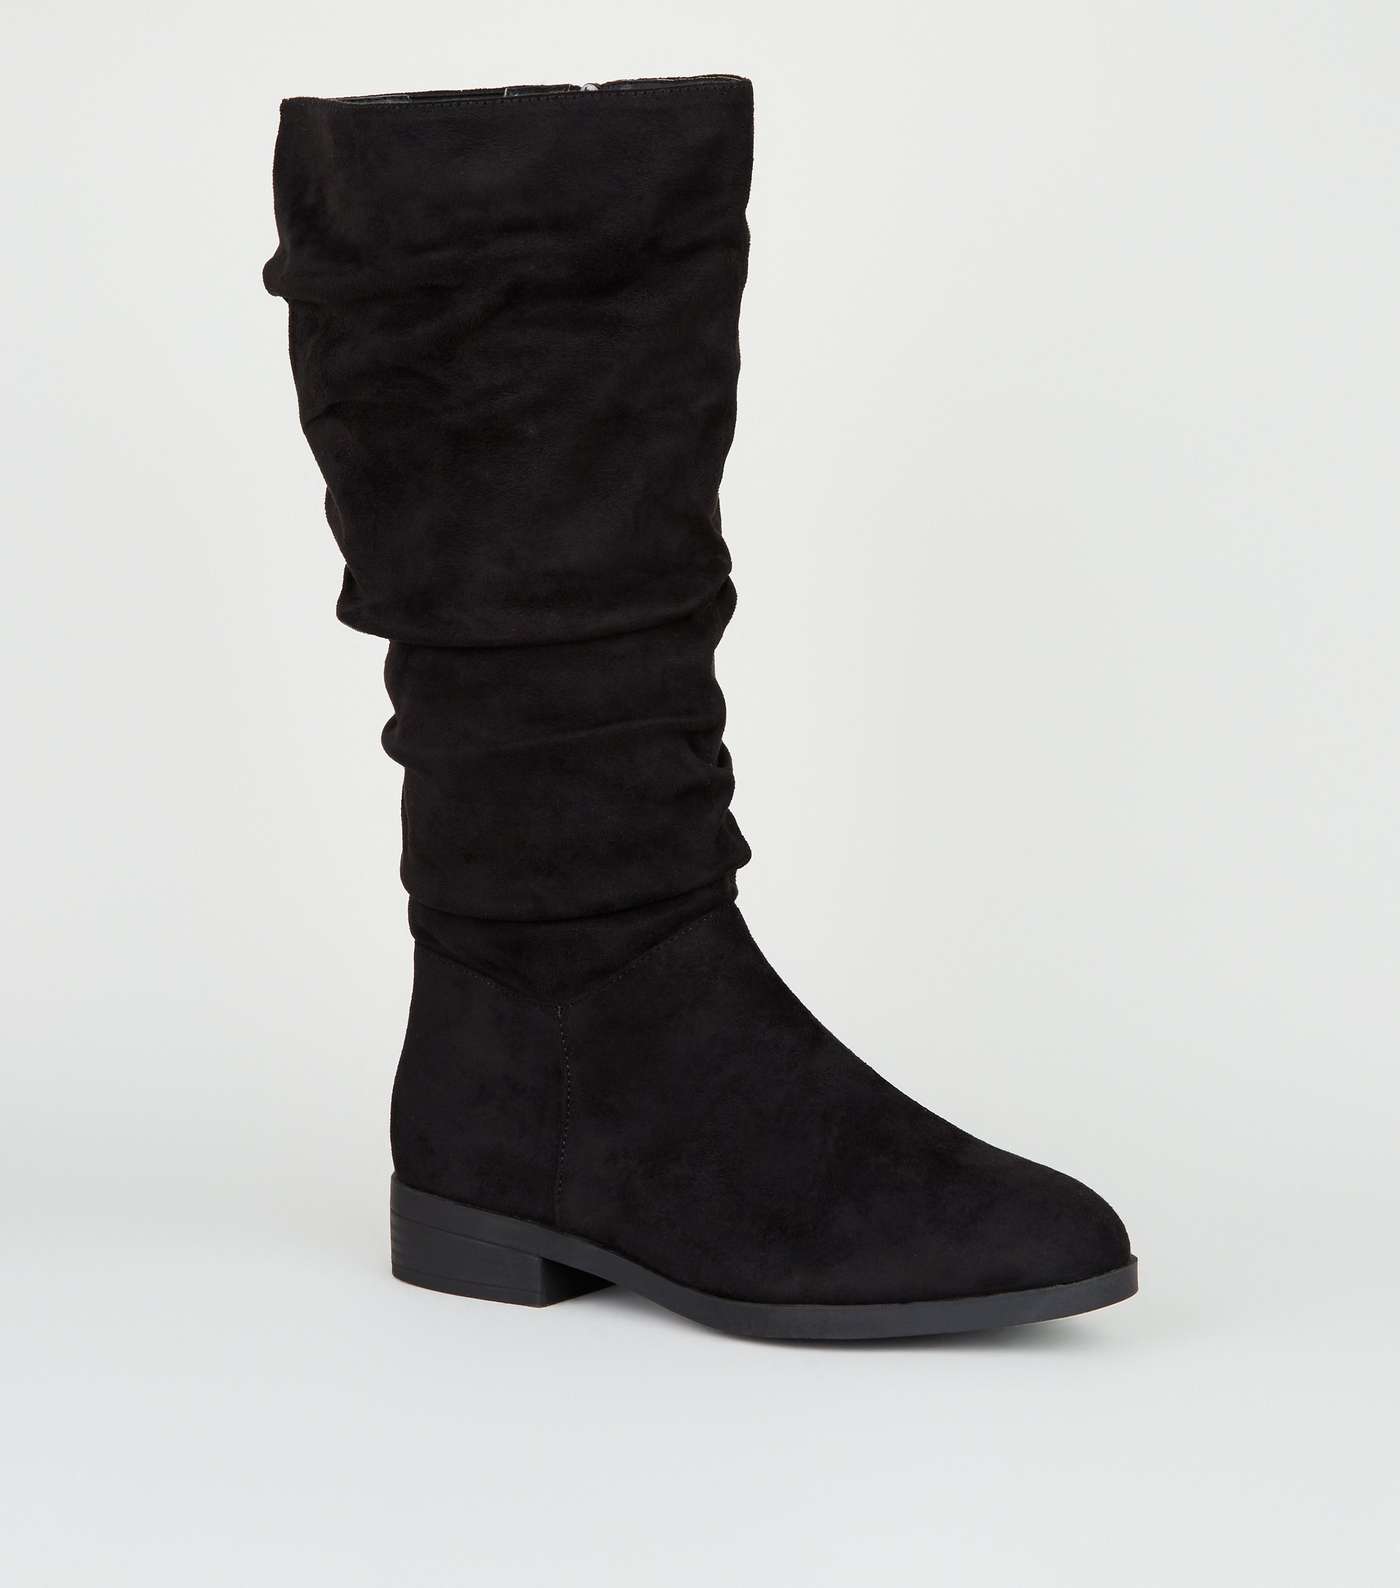 Extra Calf Fit Black Suedette Knee High Boots